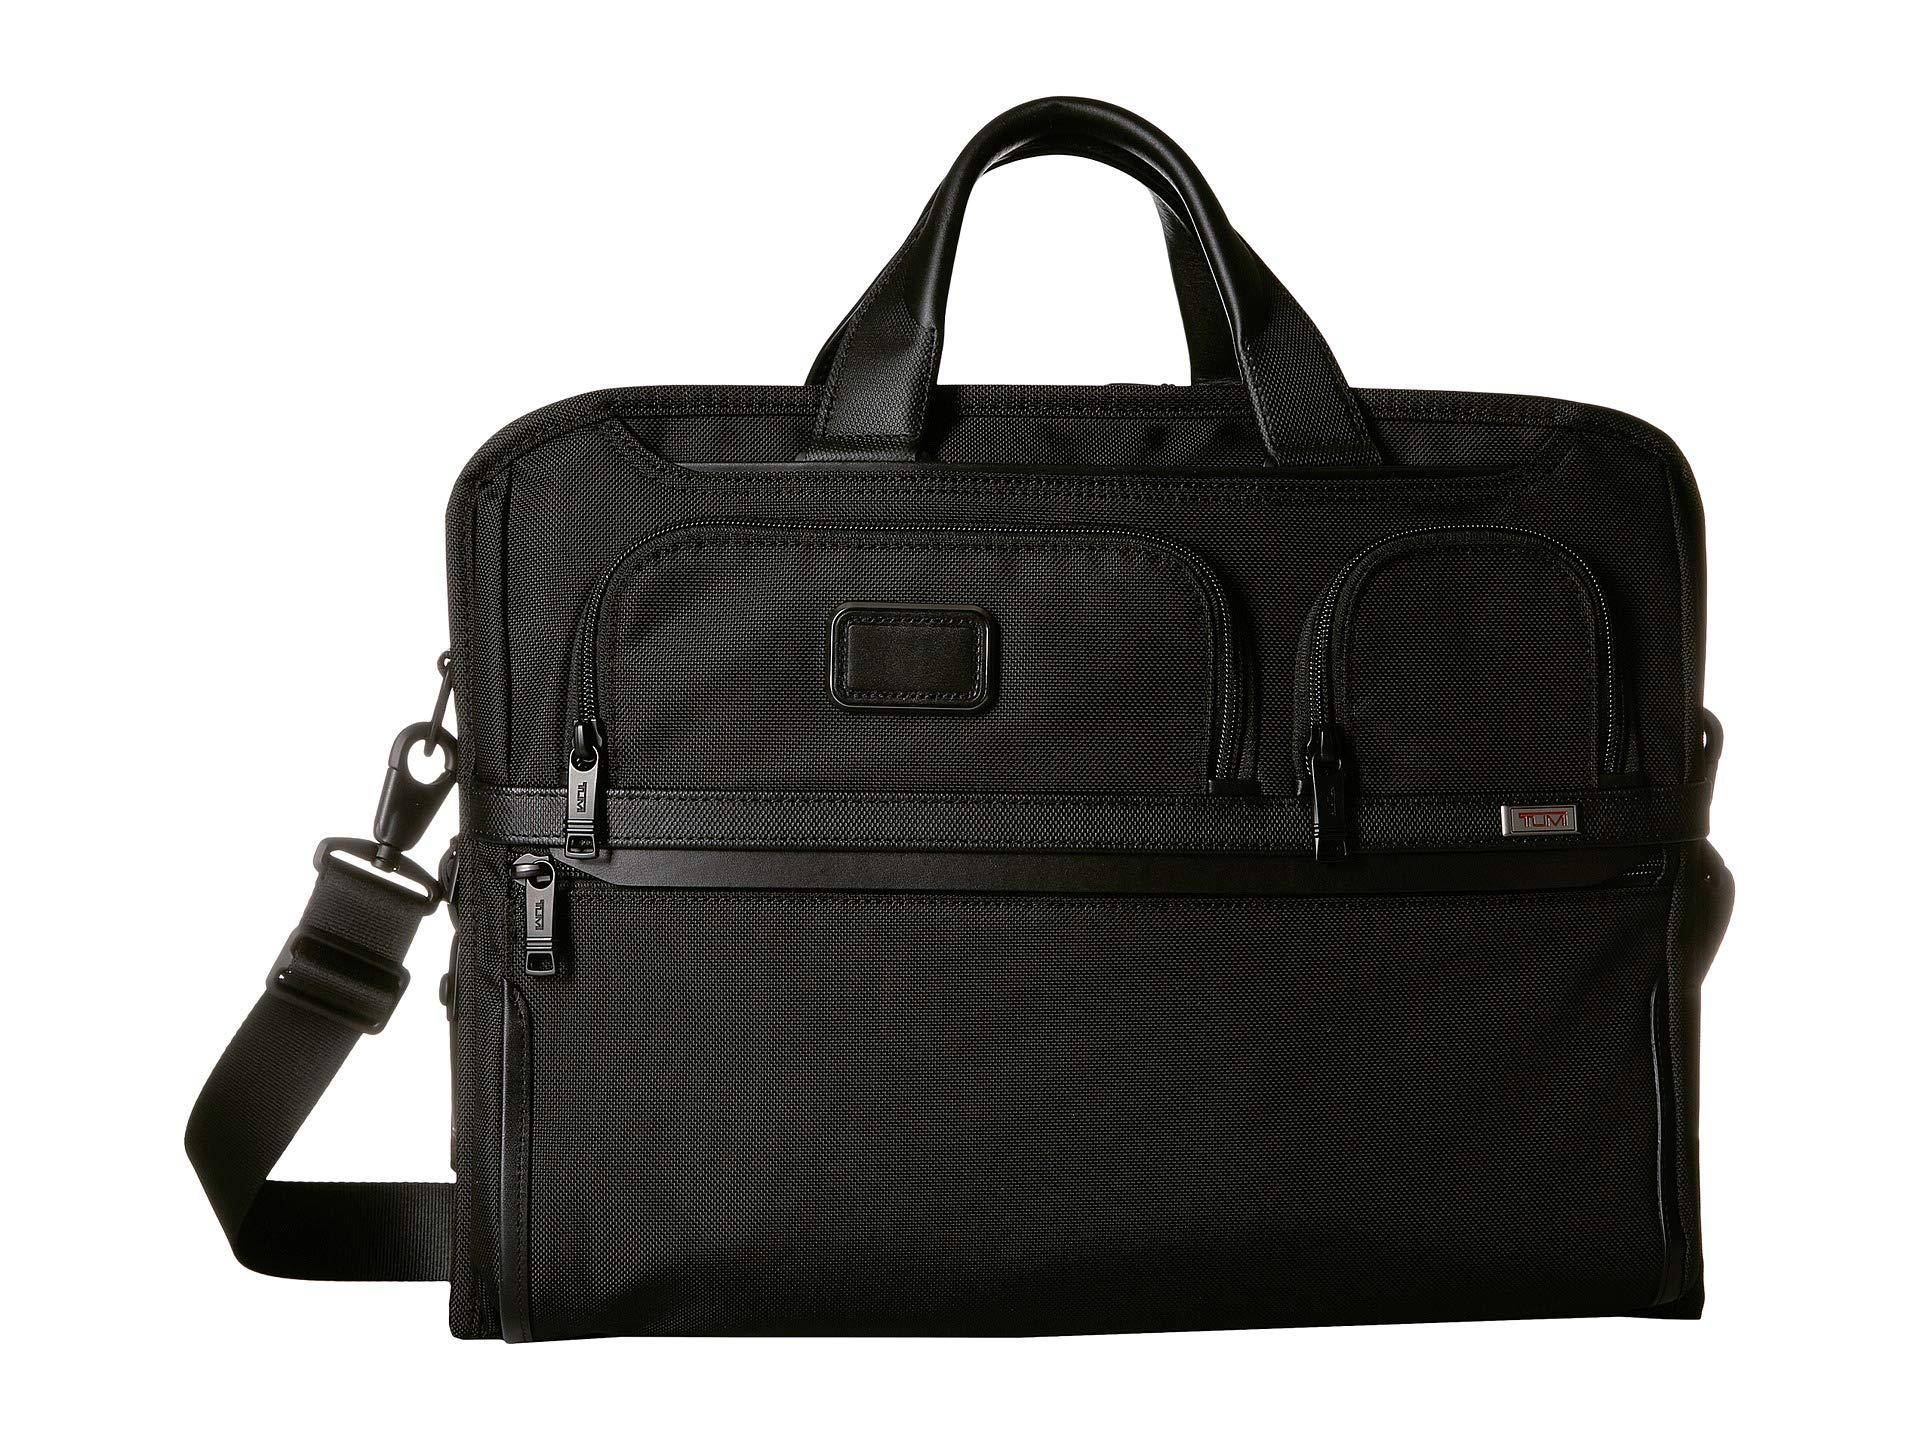 Lyst - Tumi Alpha 3 Compact Large Screen Laptop Brief (black) Luggage ...